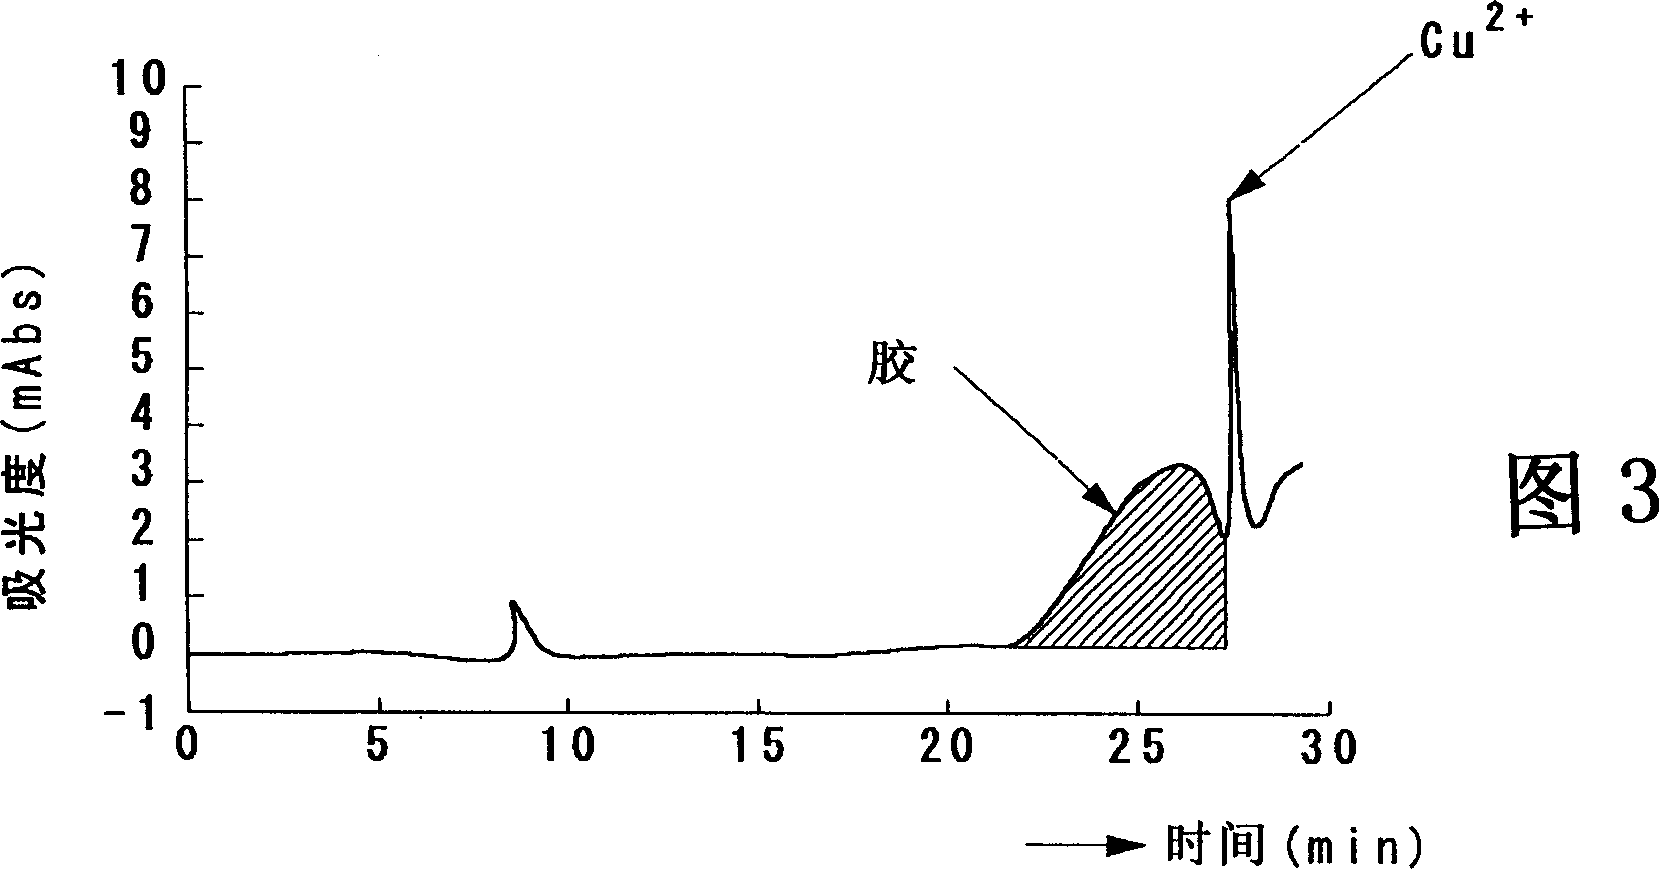 Method for measuring concentrations and molecular weights of glue and gelatin